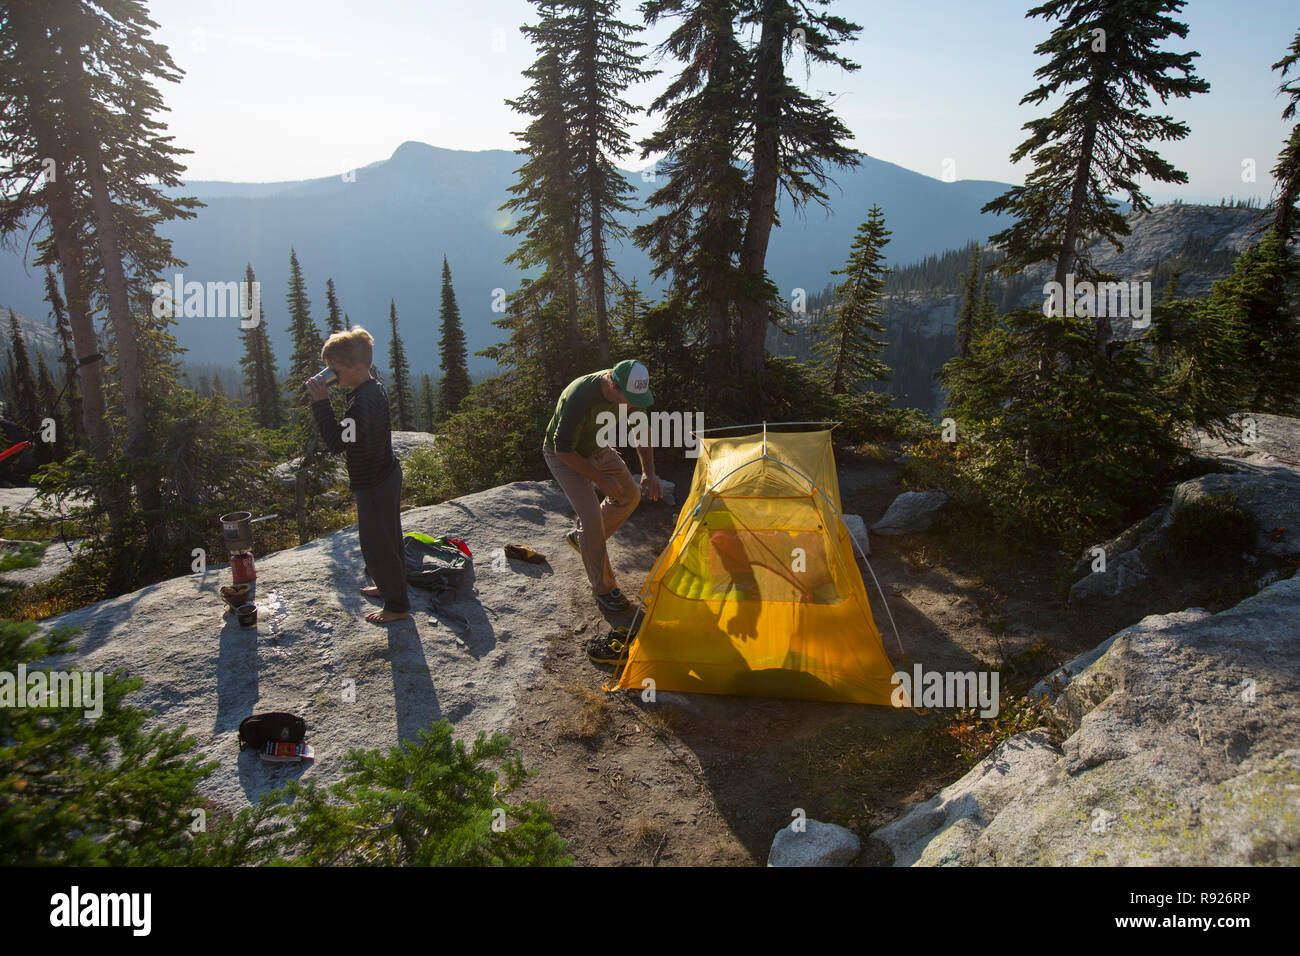 View of a father and son near a camping tent in the mountains, Selkirk Mountains, Sandpoint, Idaho, USA Stock Photo